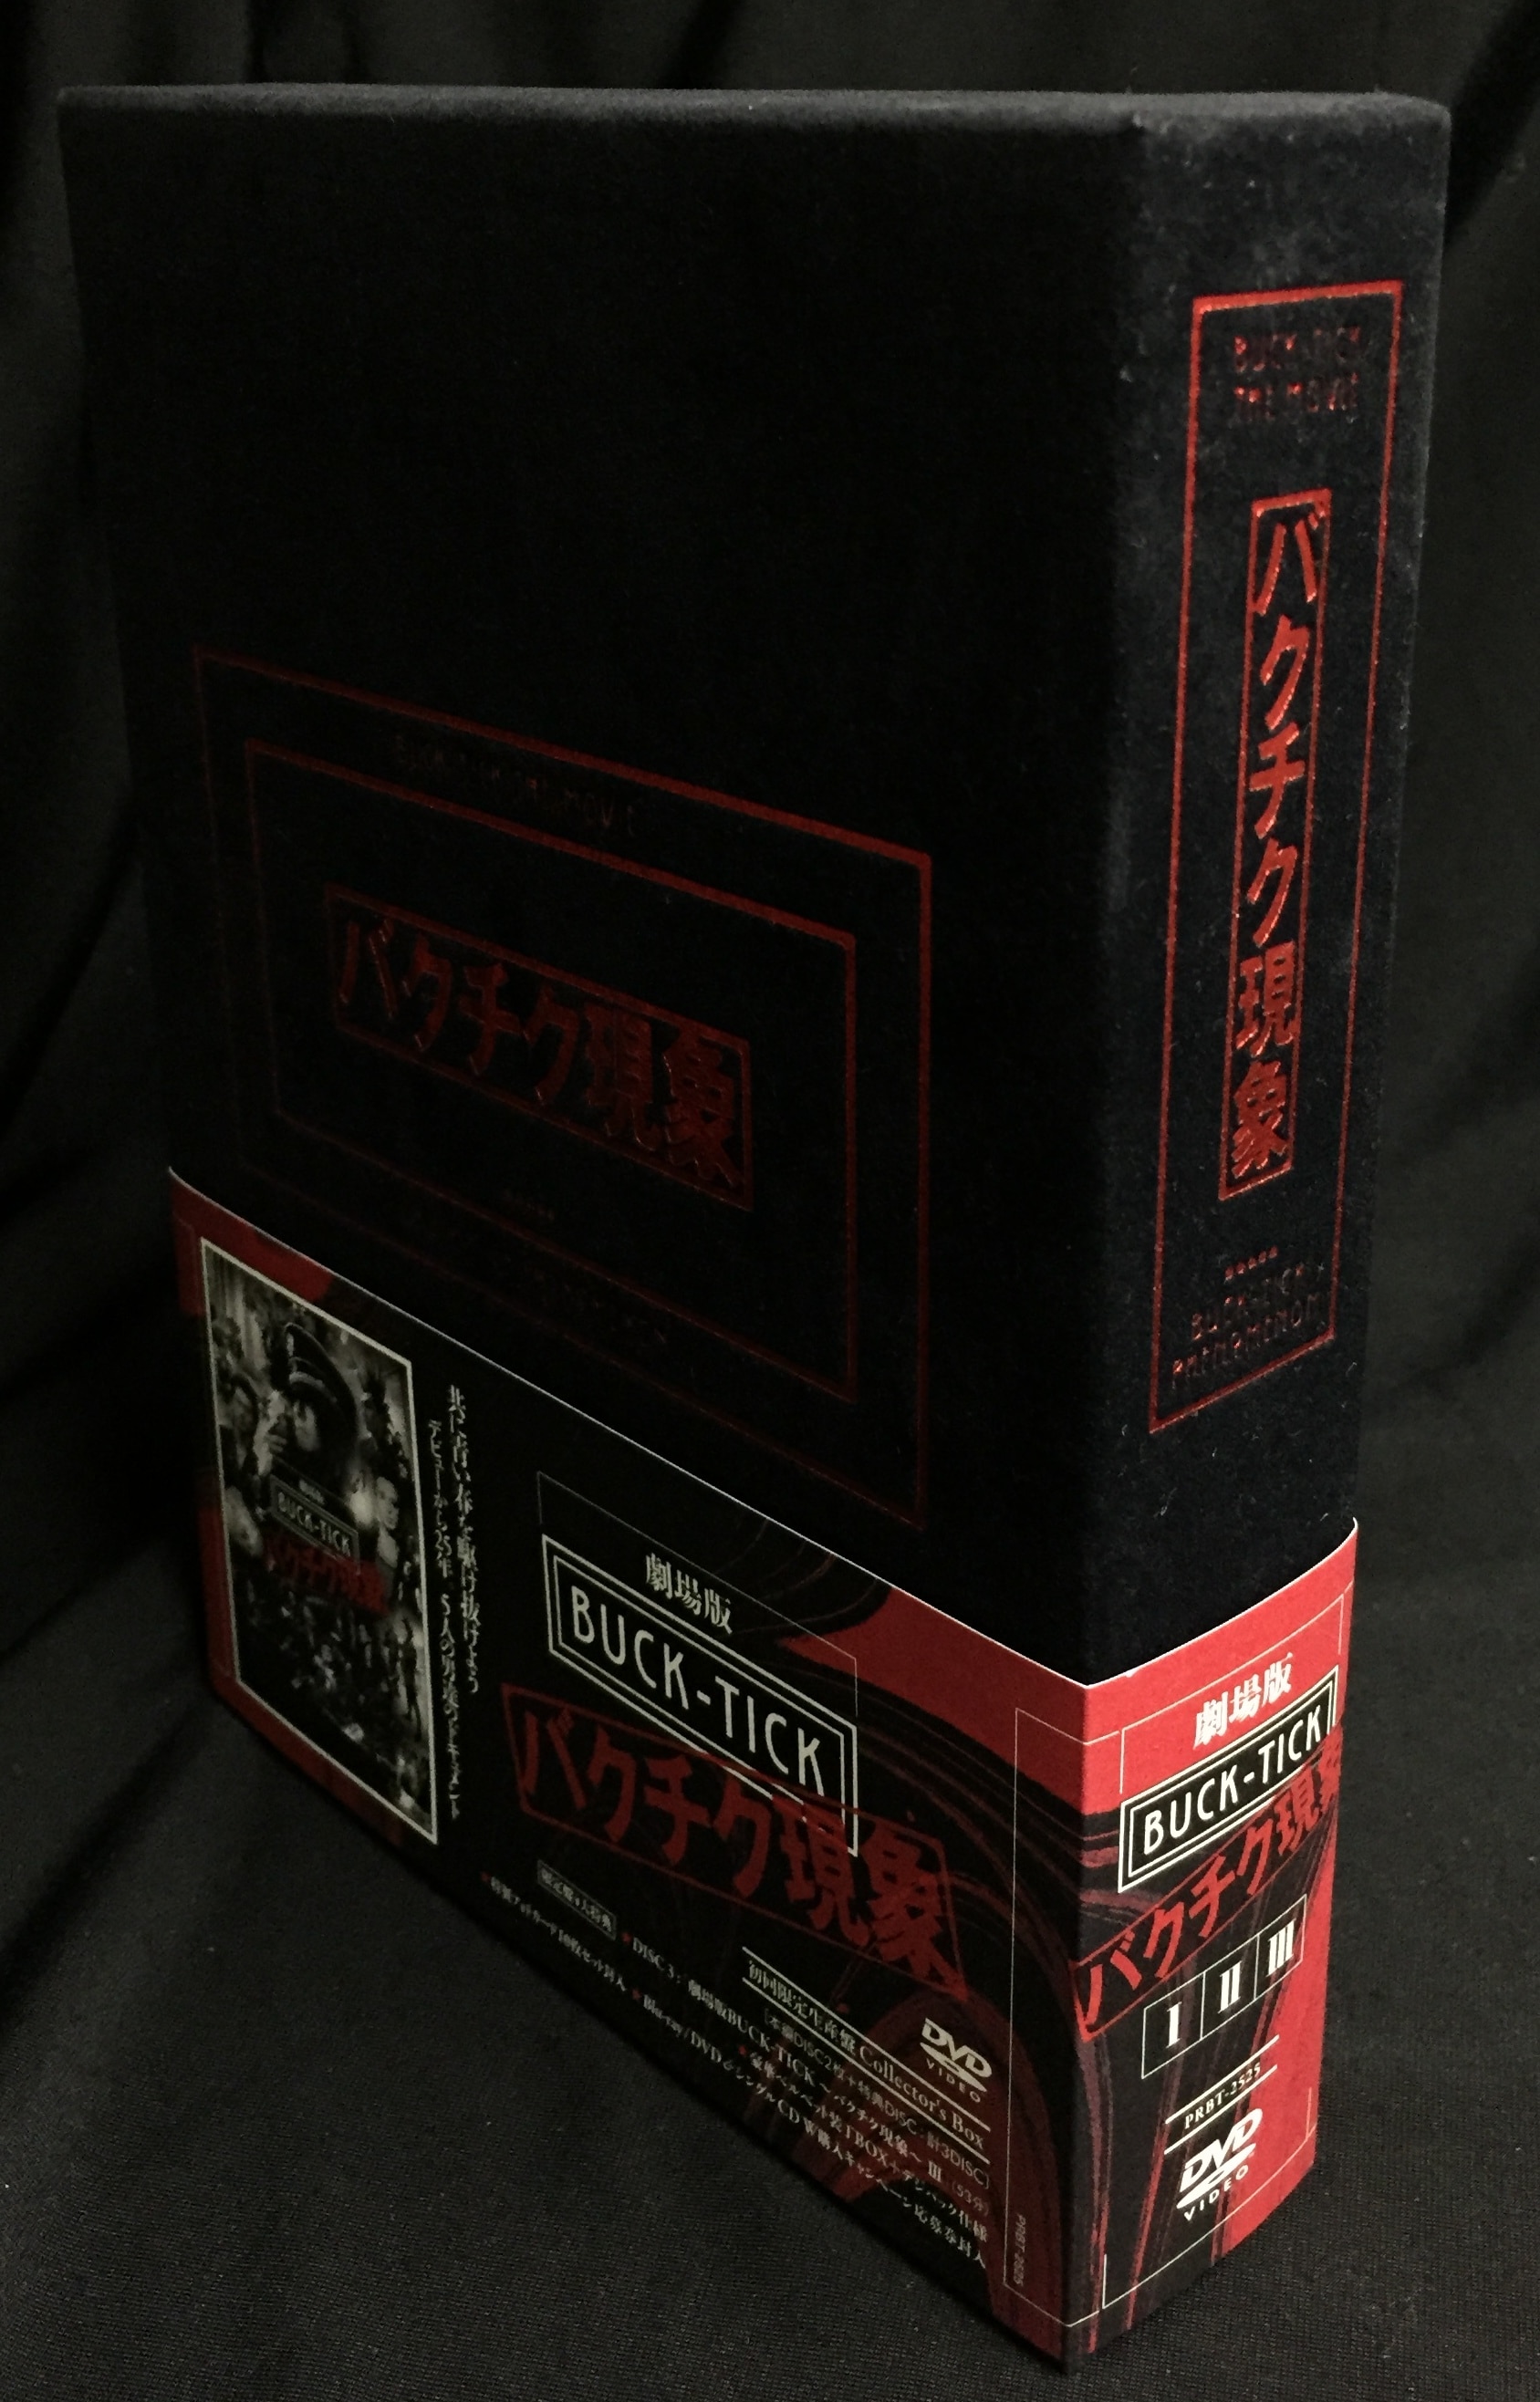 BUCK-TICK First edition Press Limited Edition Collector's Box